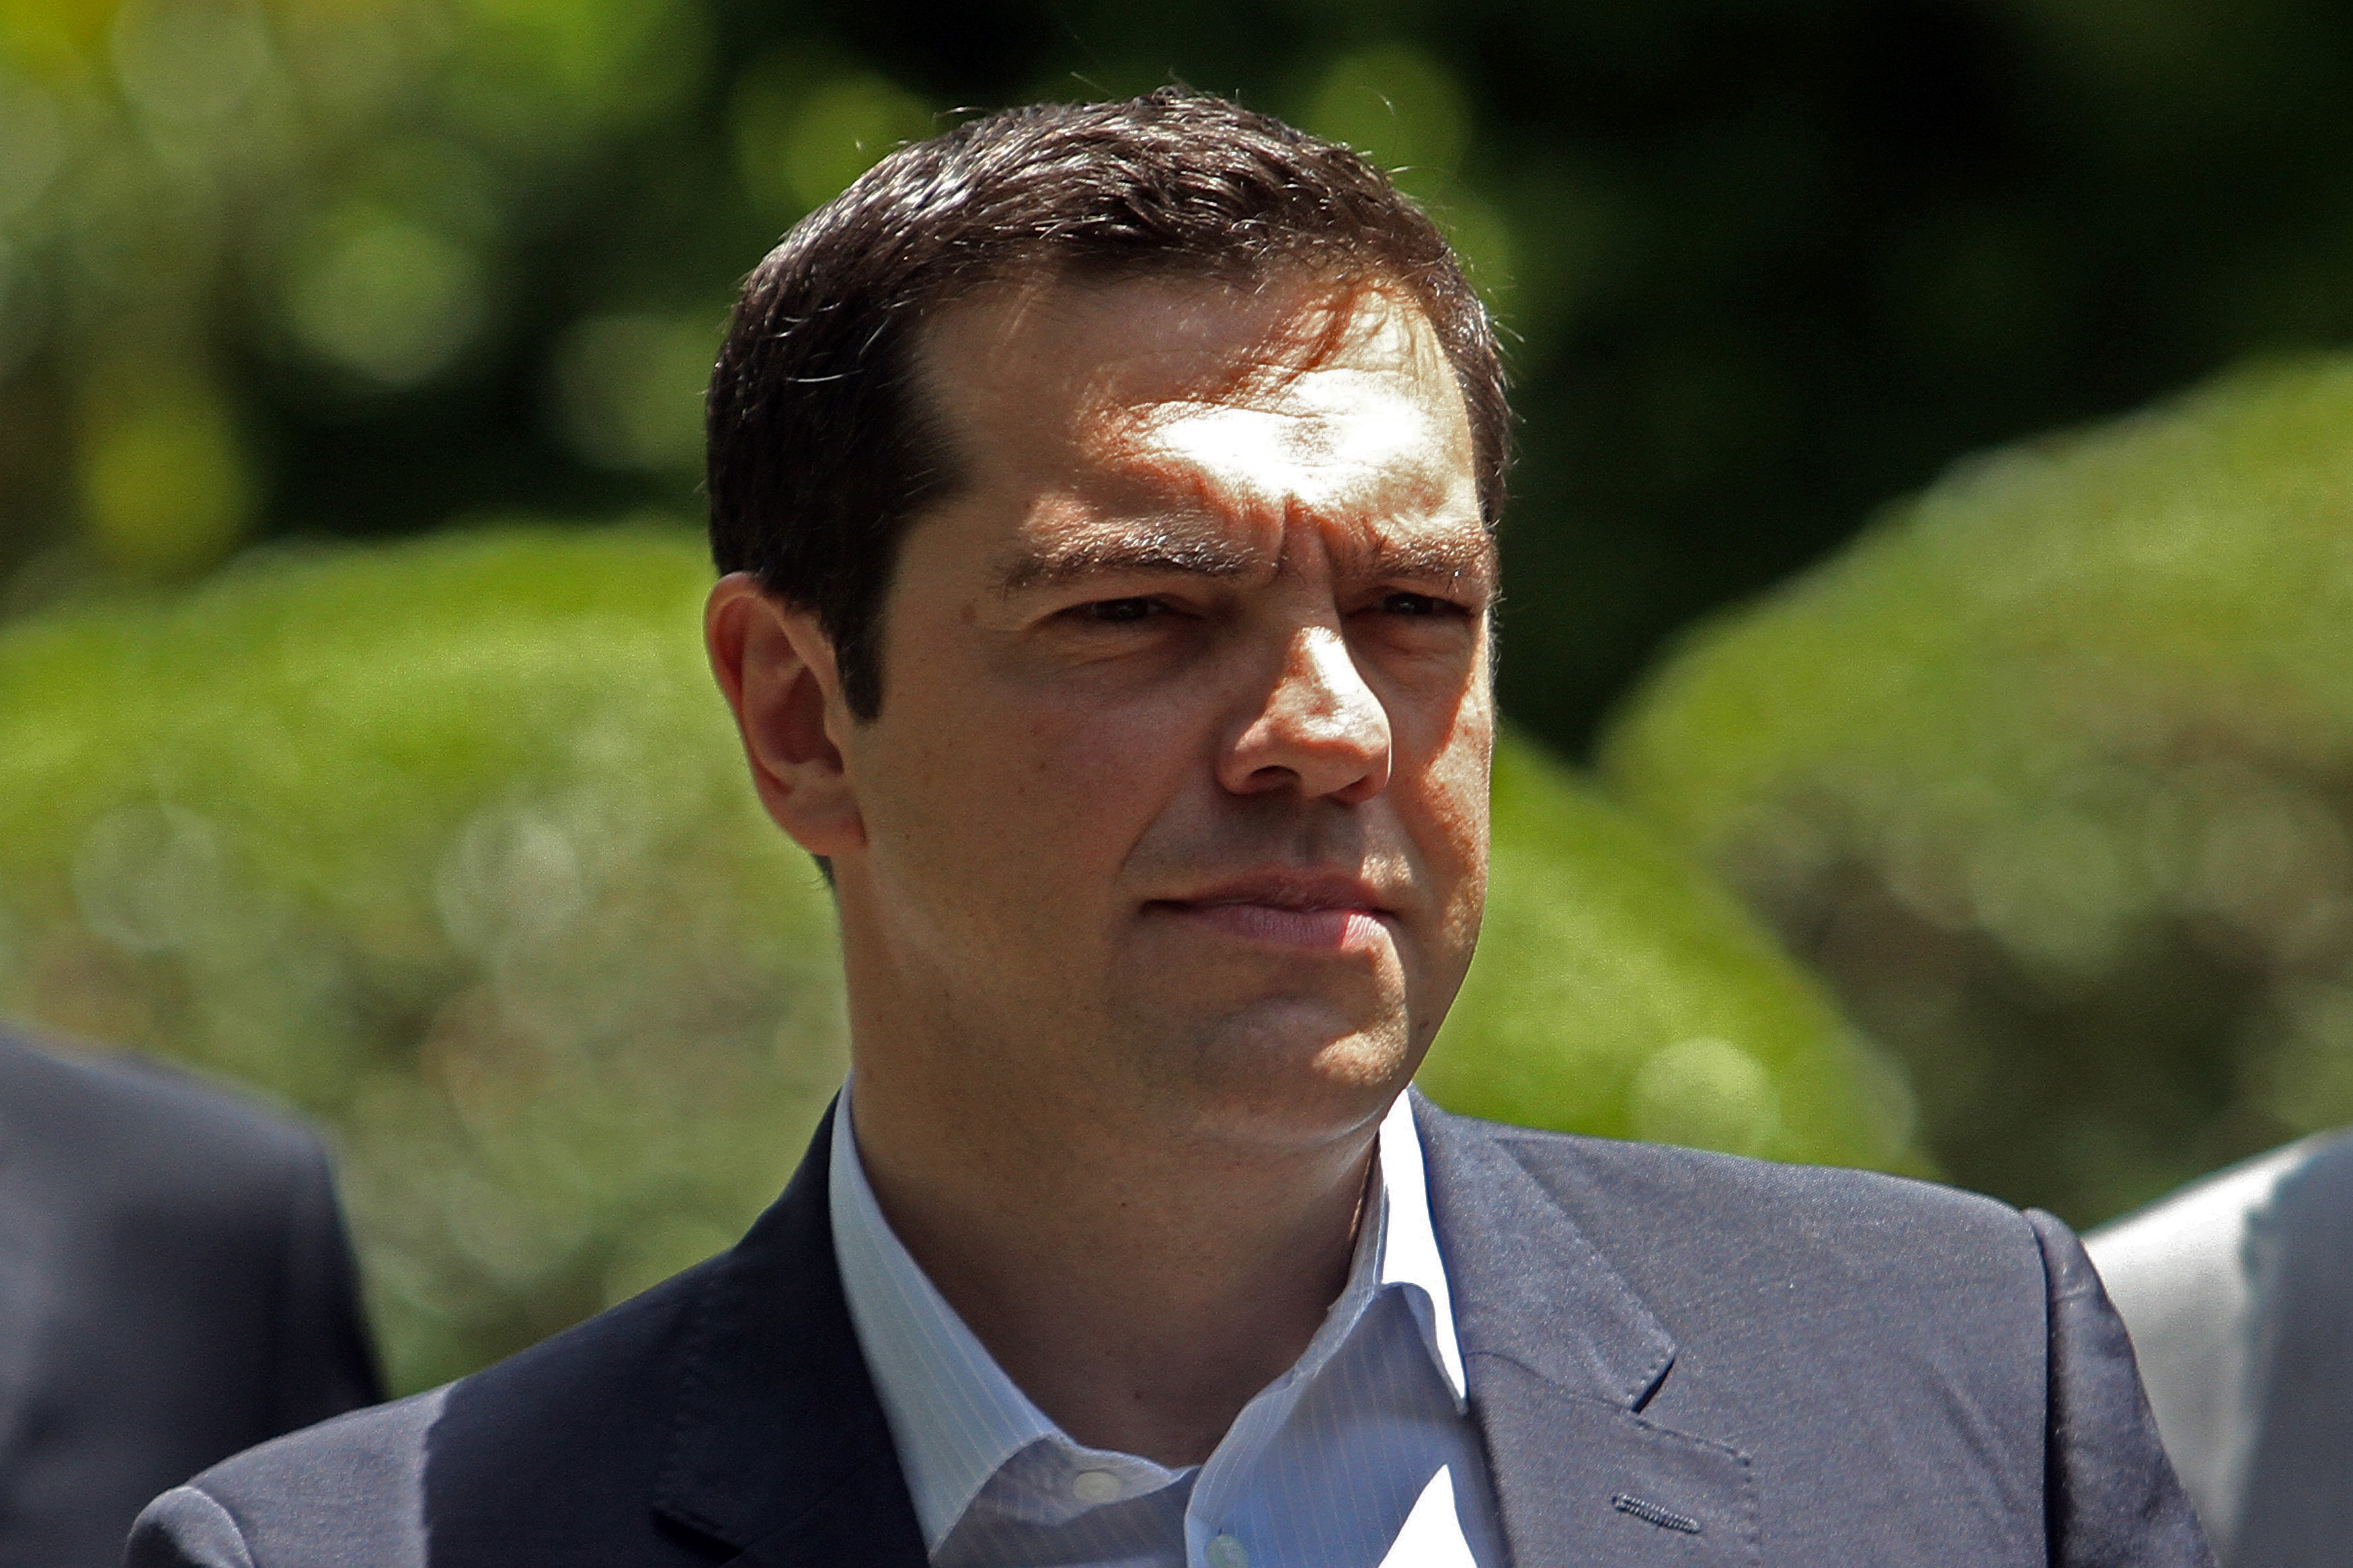 Tsipras heads to Brussels to discuss European Commission presidency